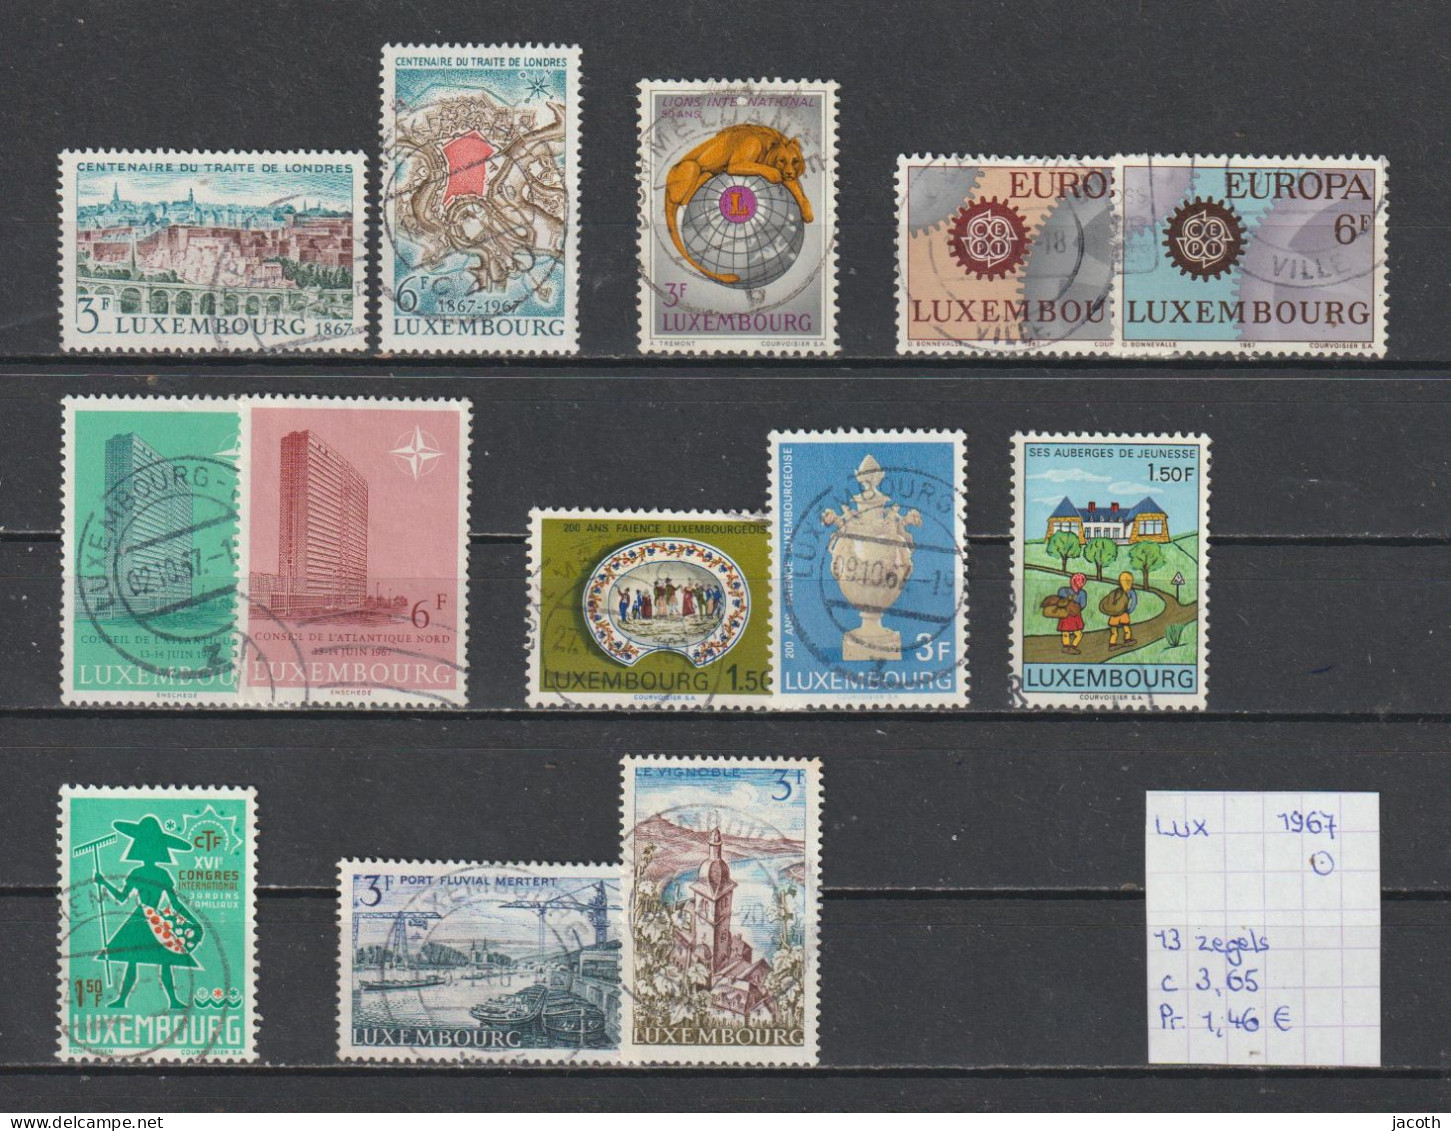 (TJ) Luxembourg 1967 - 13 Zegels (gest./obl./used) - Usados